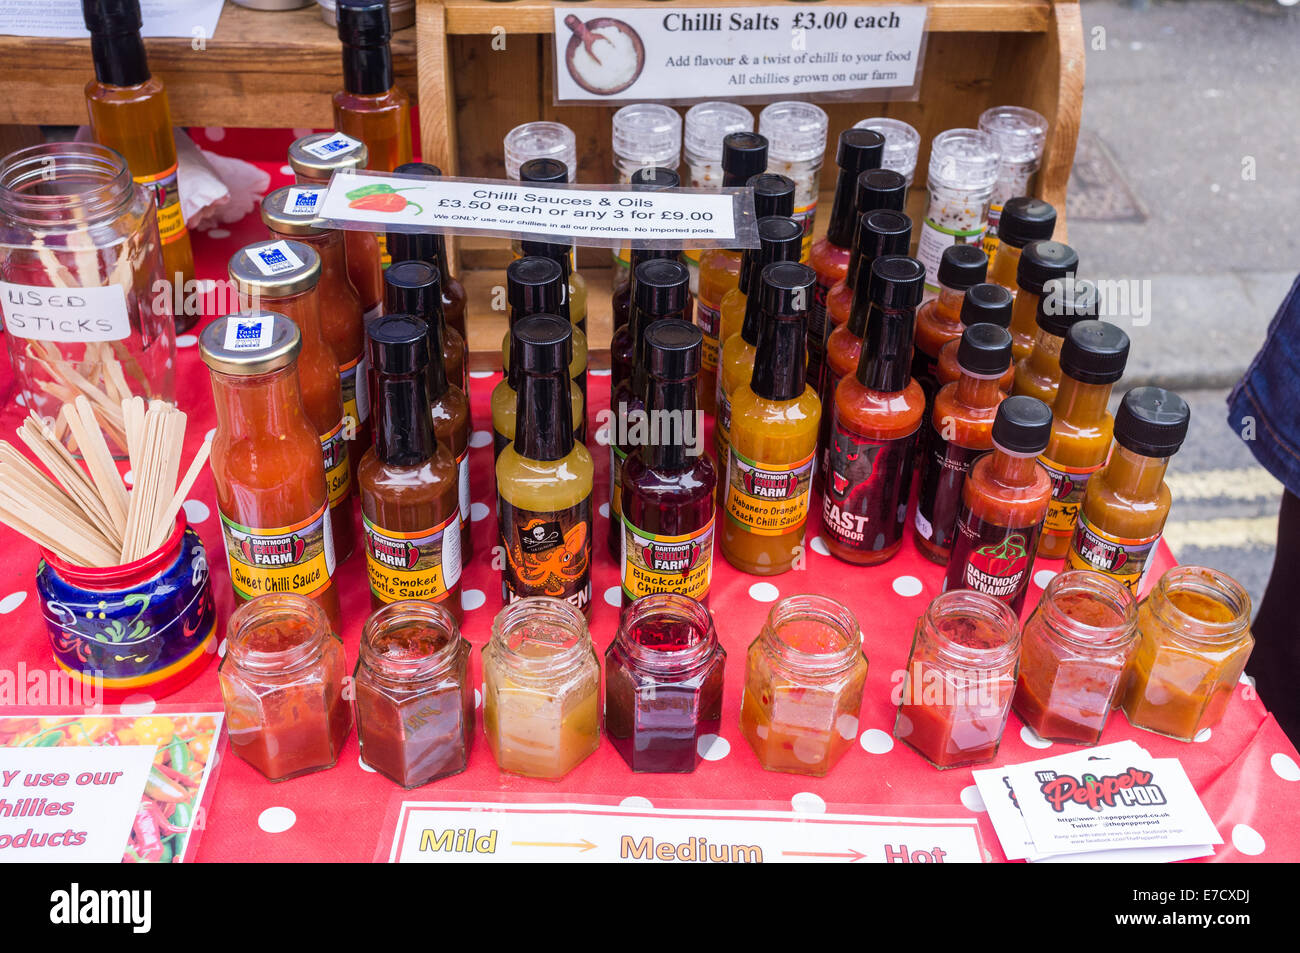 The Ashburton Food & Drink Festival. The Dartmoor Chilli Farm stall showing bottles and jars of their Chilli relishes displayed. Stock Photo